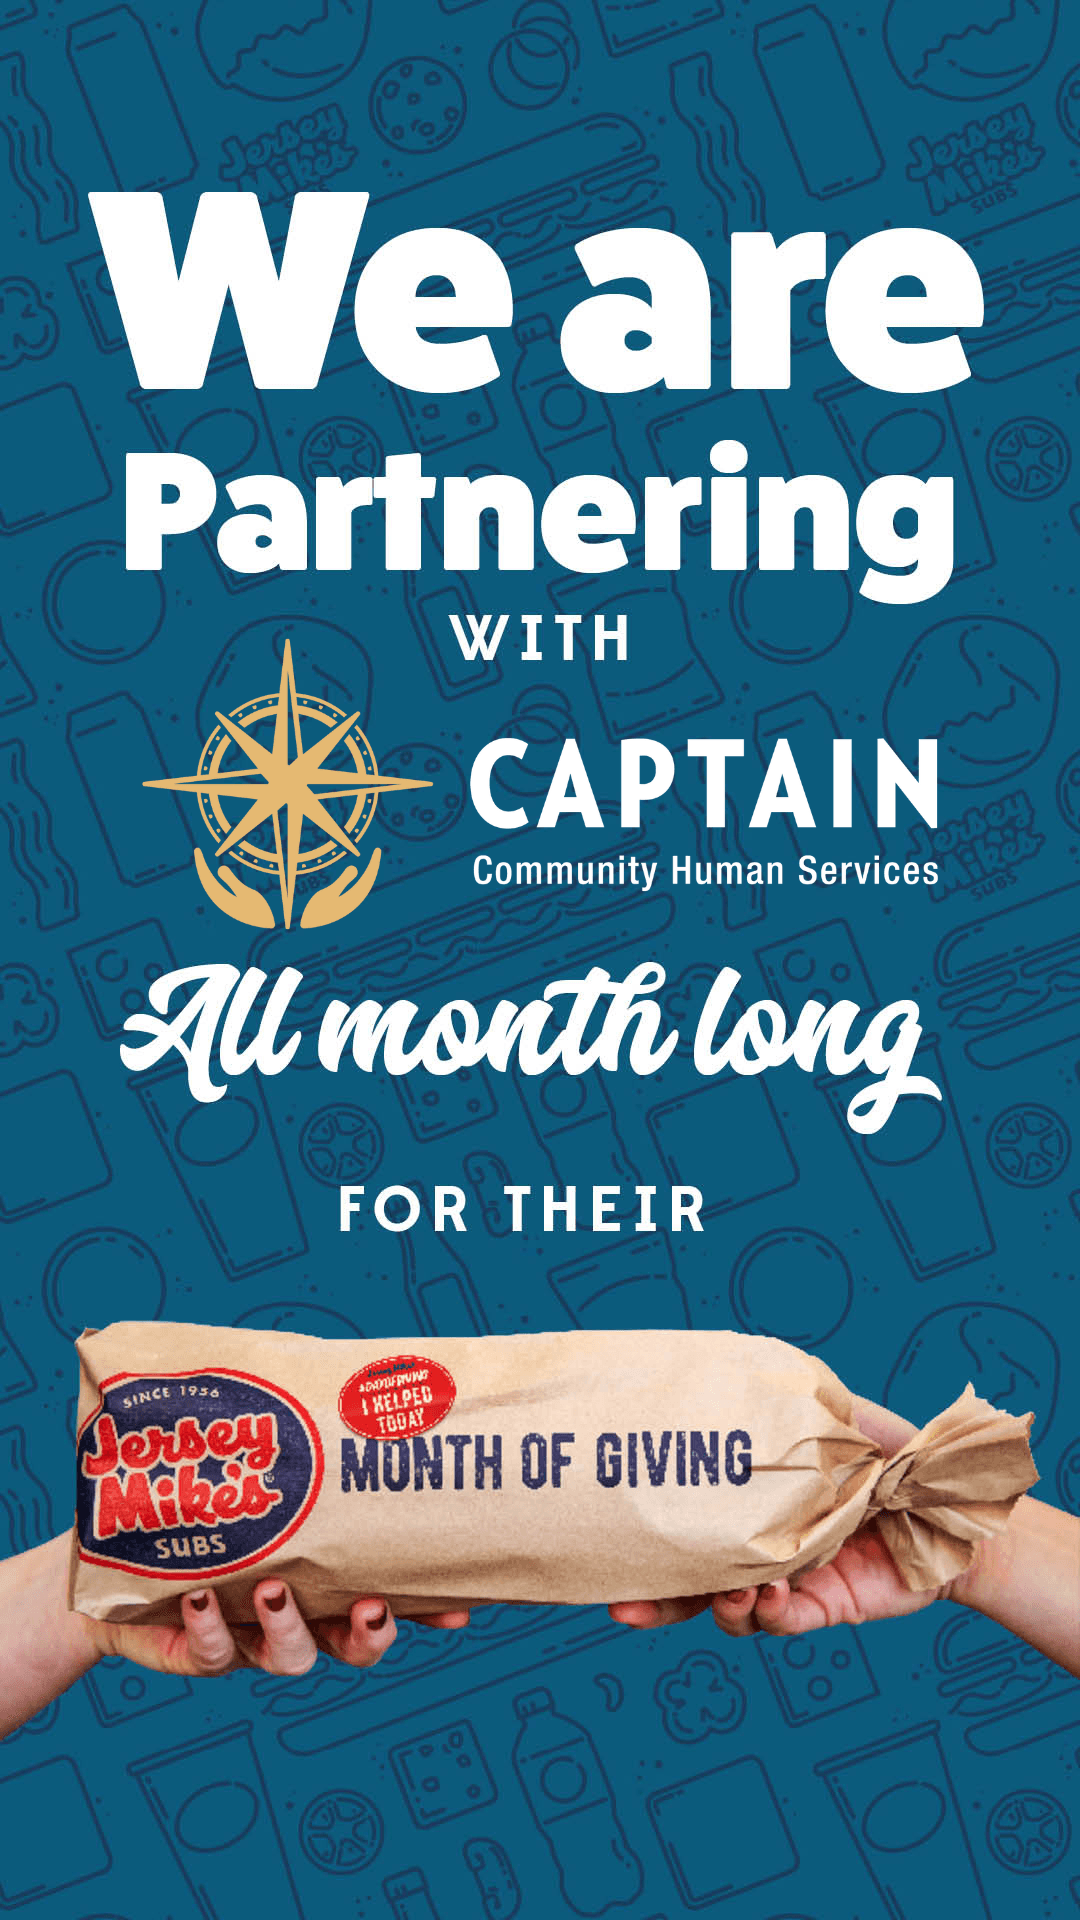 Eat a Sub, Change a Life: Jersey Mike's Month of Giving